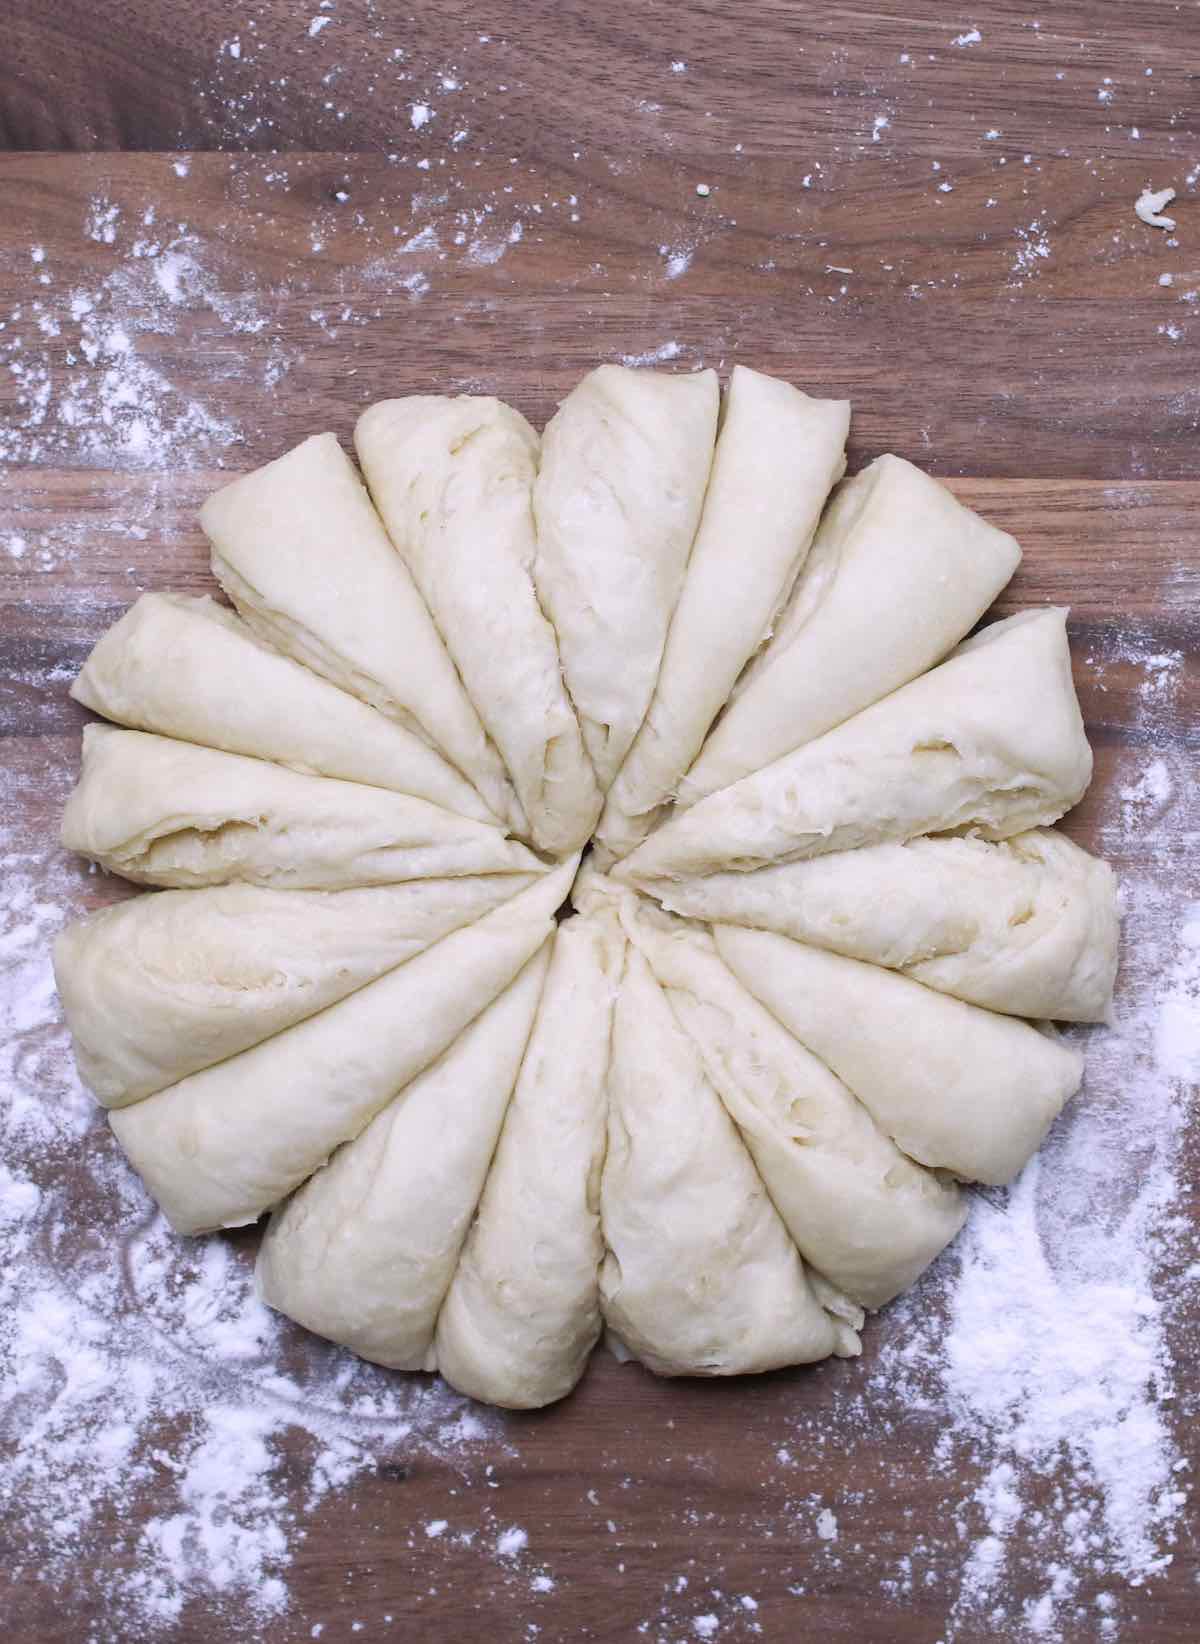 Divide the dough into 16 small portions on the cutting board.